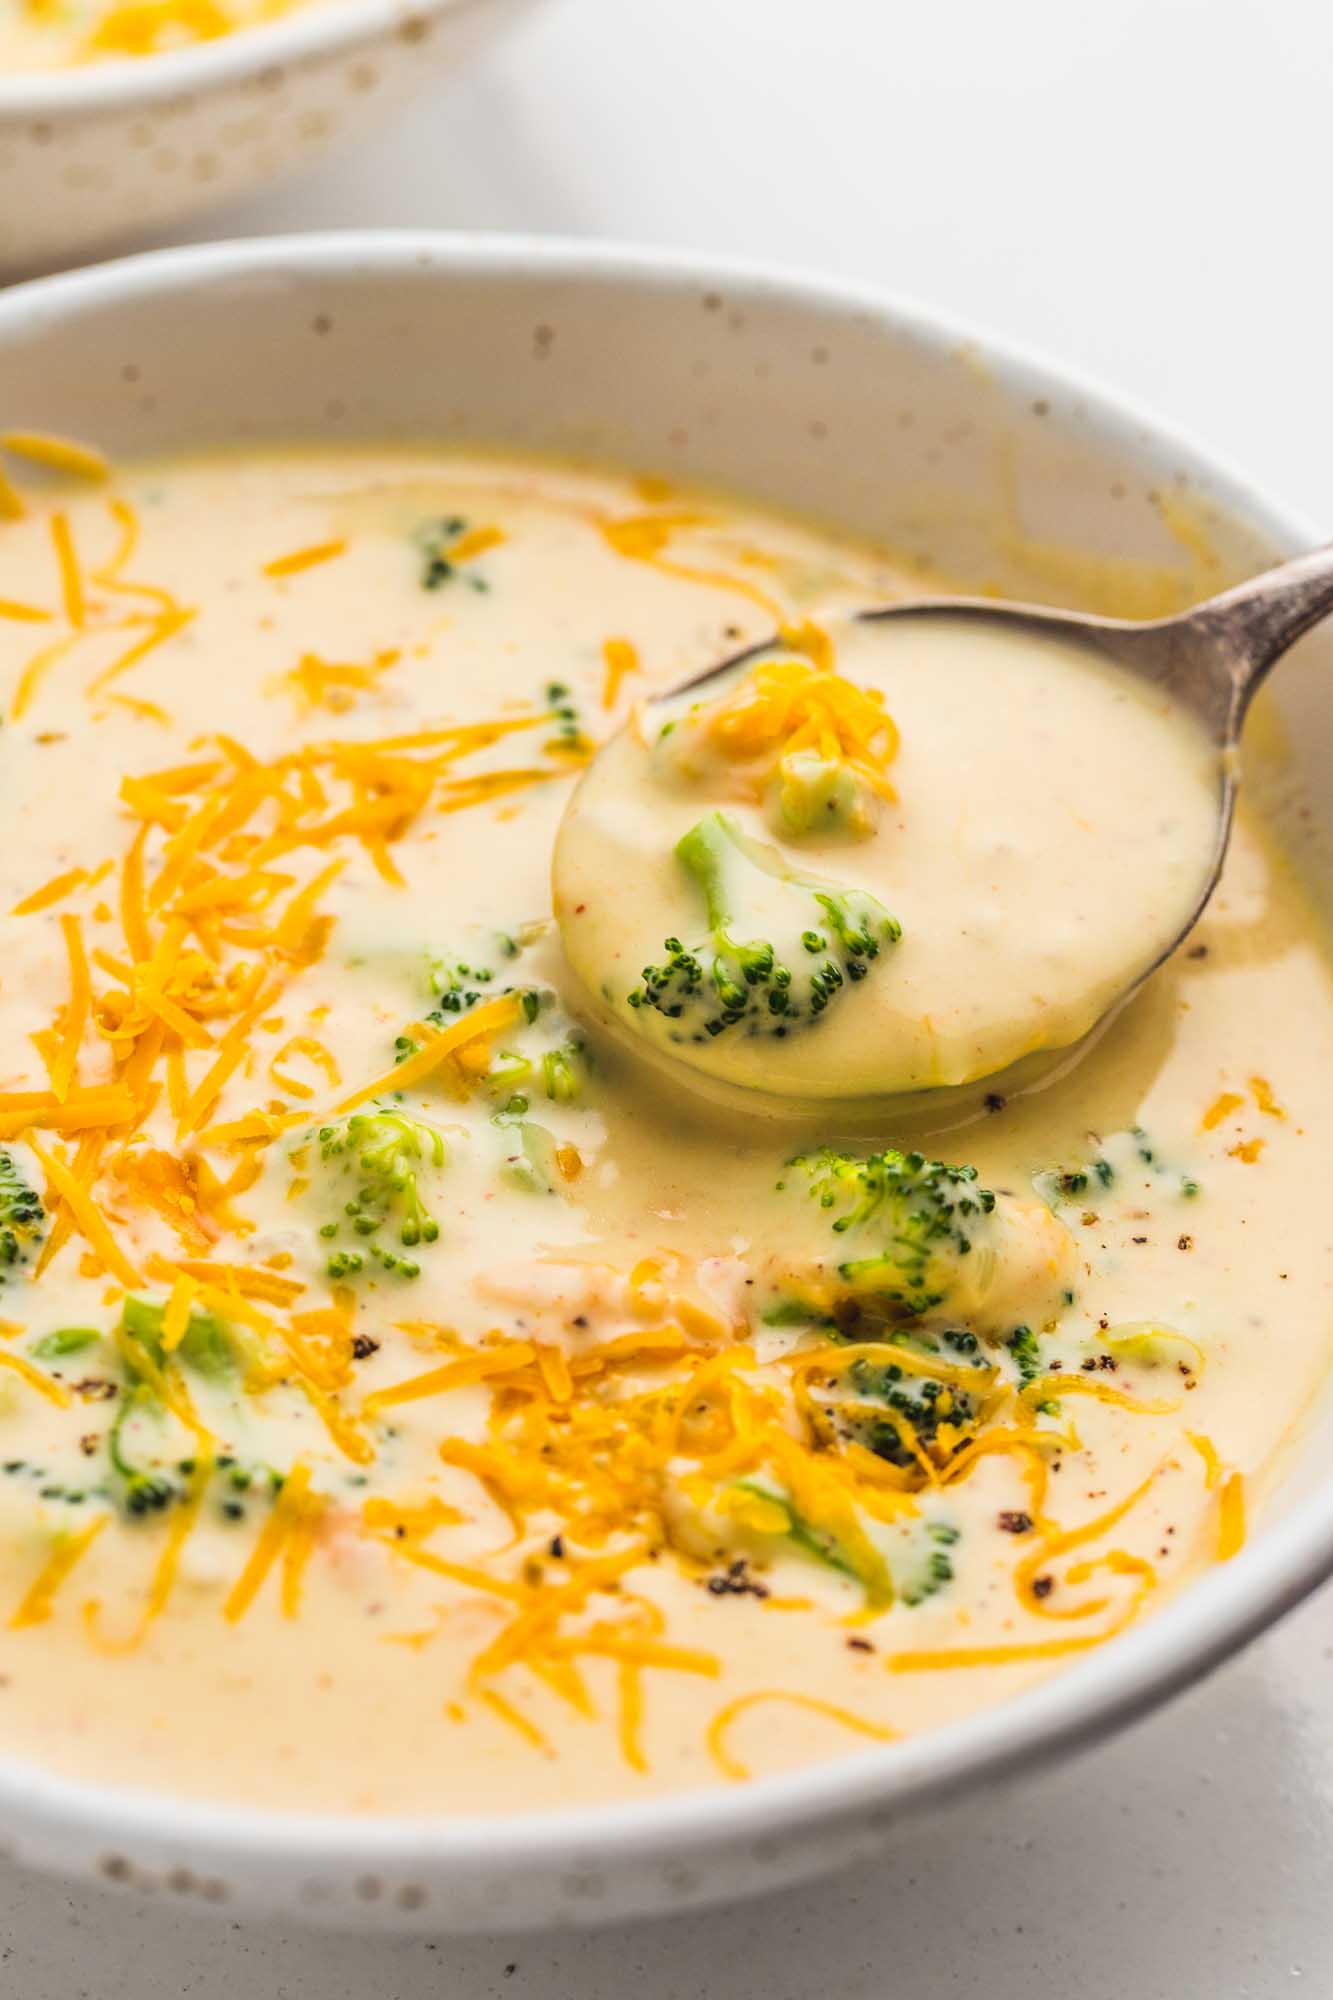 Broccoli cheddar soup served in a white bowl, with a soup spoon